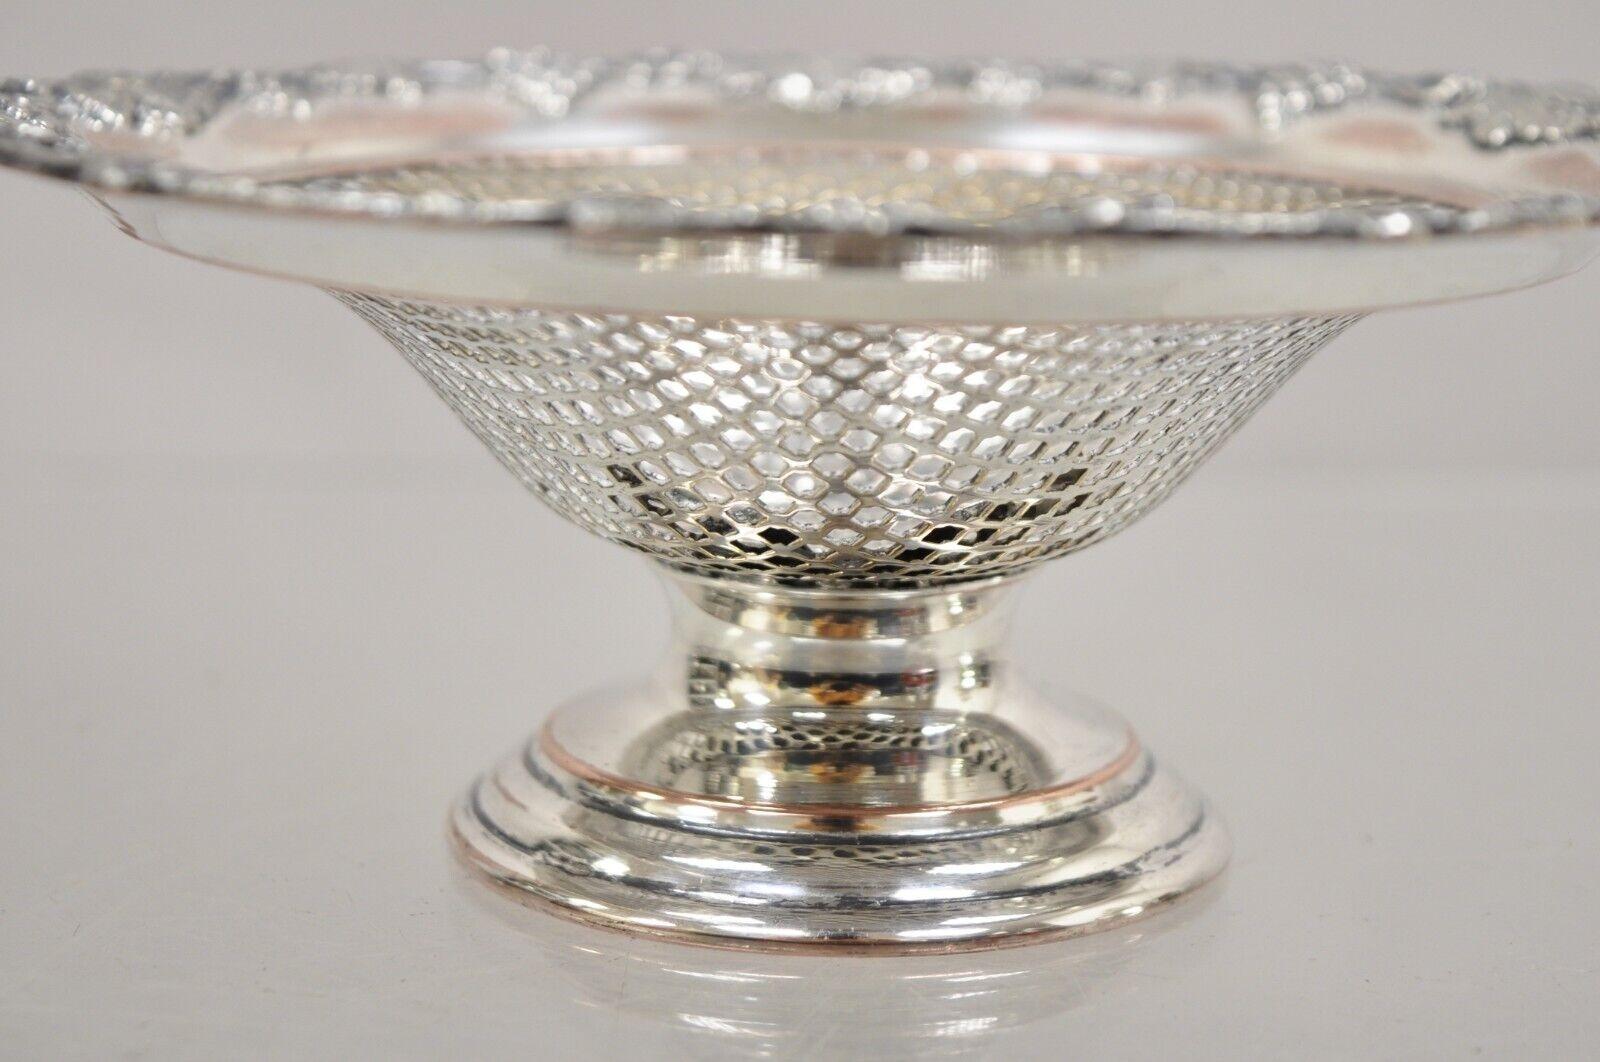 English Edwardian Silver Plated Wreath Design Small Mesh Basket Candy Dish -Pair For Sale 2